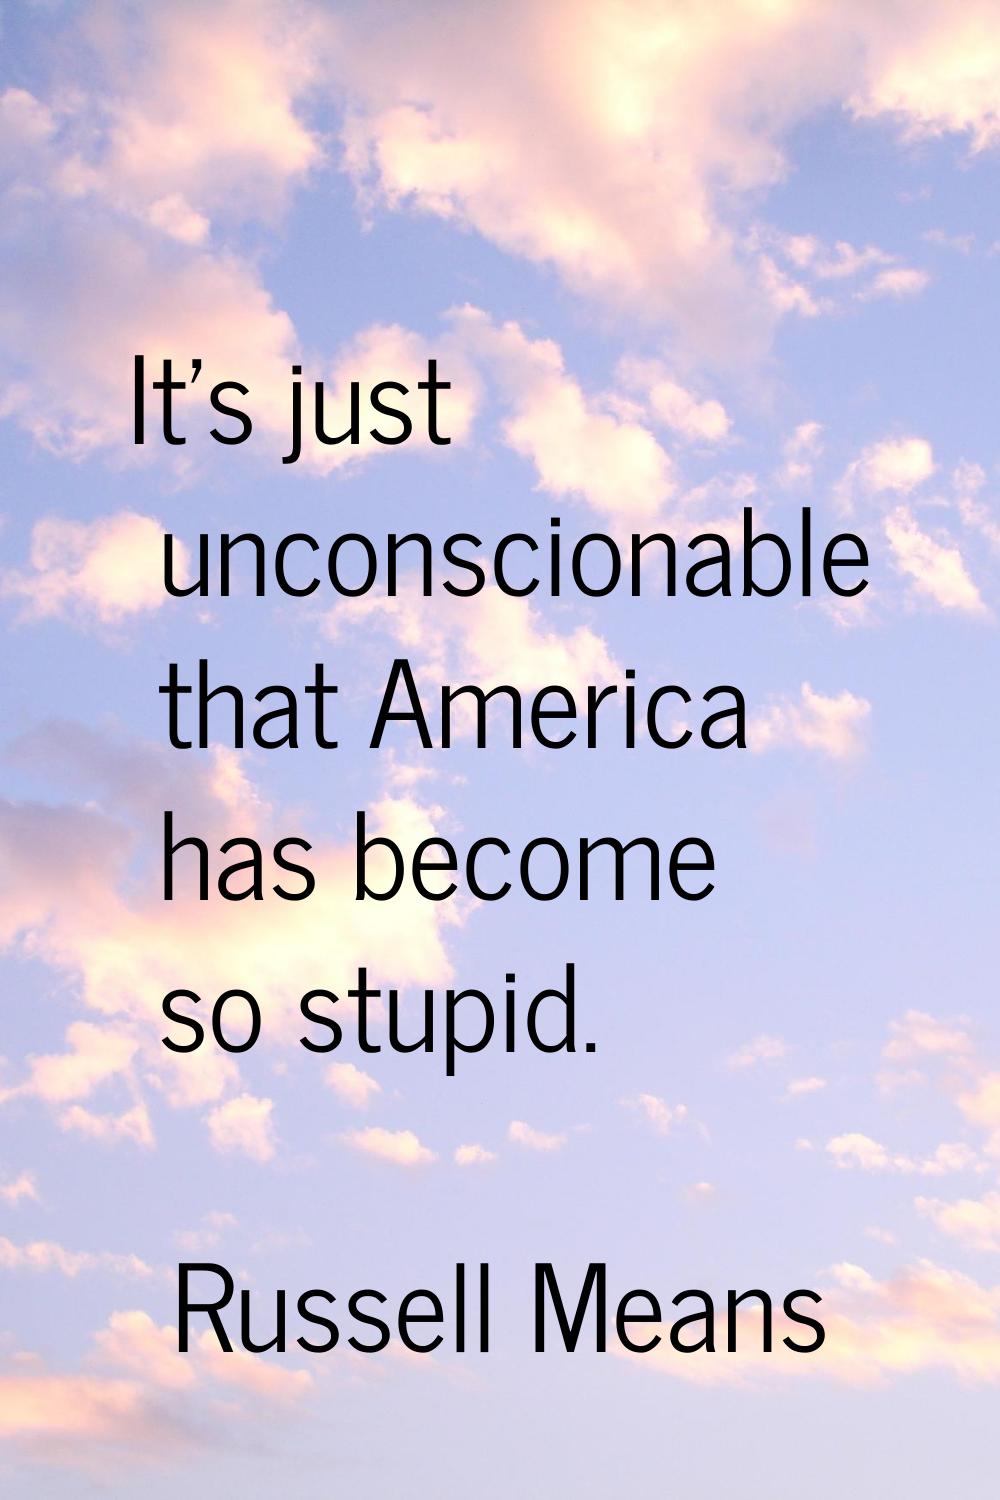 It's just unconscionable that America has become so stupid.